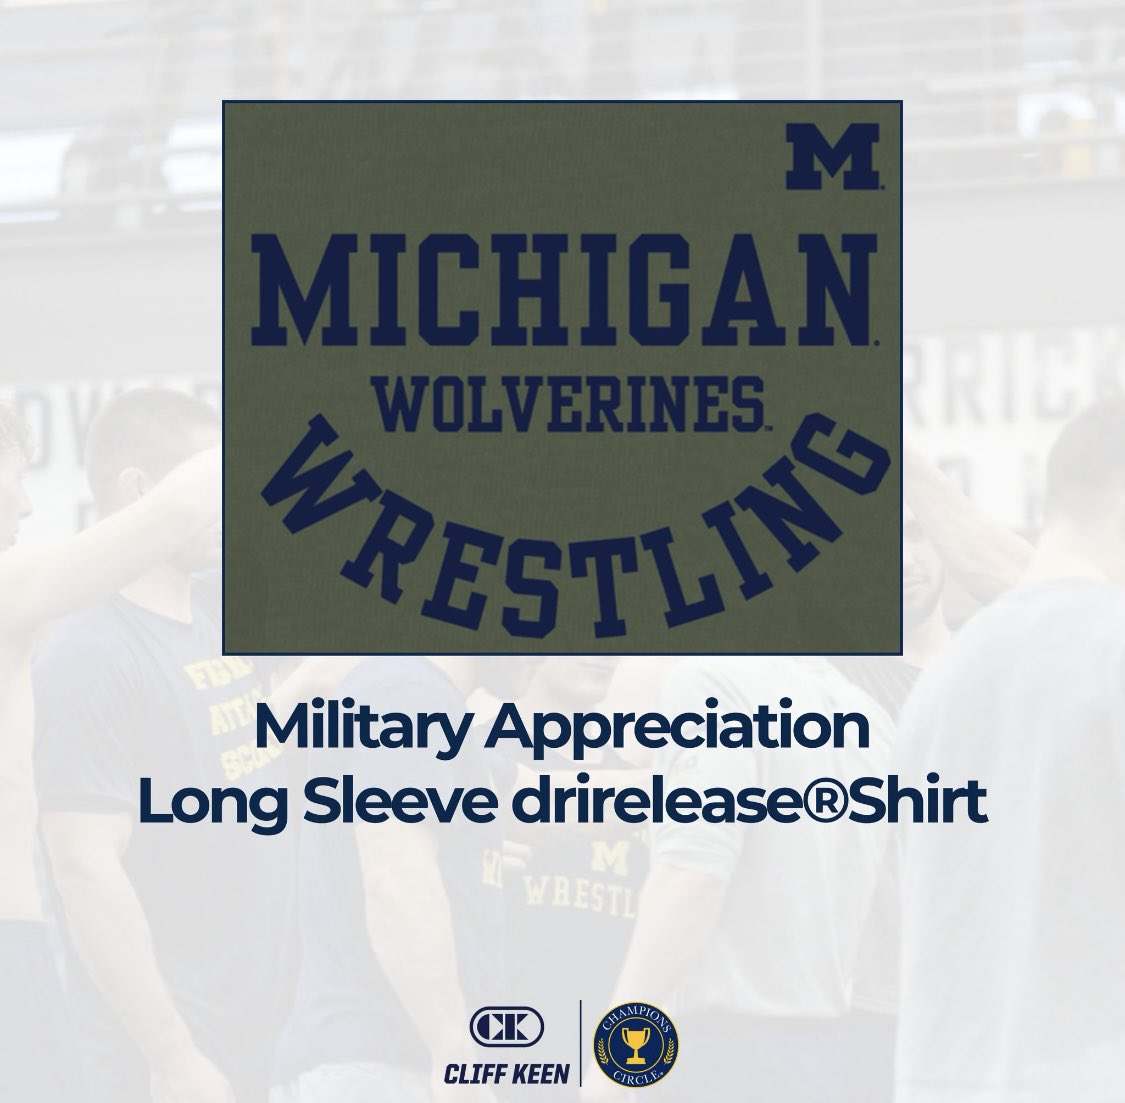 Last chance to snag Michigan Wrestling merch! Shop the collection below! Military Appreciation Shirt bit.ly/3Vk5QzF Team 102 Shirt championscirclewrestle.itemorder.com/shop/product/3… Wrestling Hoodie championscirclewrestle.itemorder.com/shop/product/3…